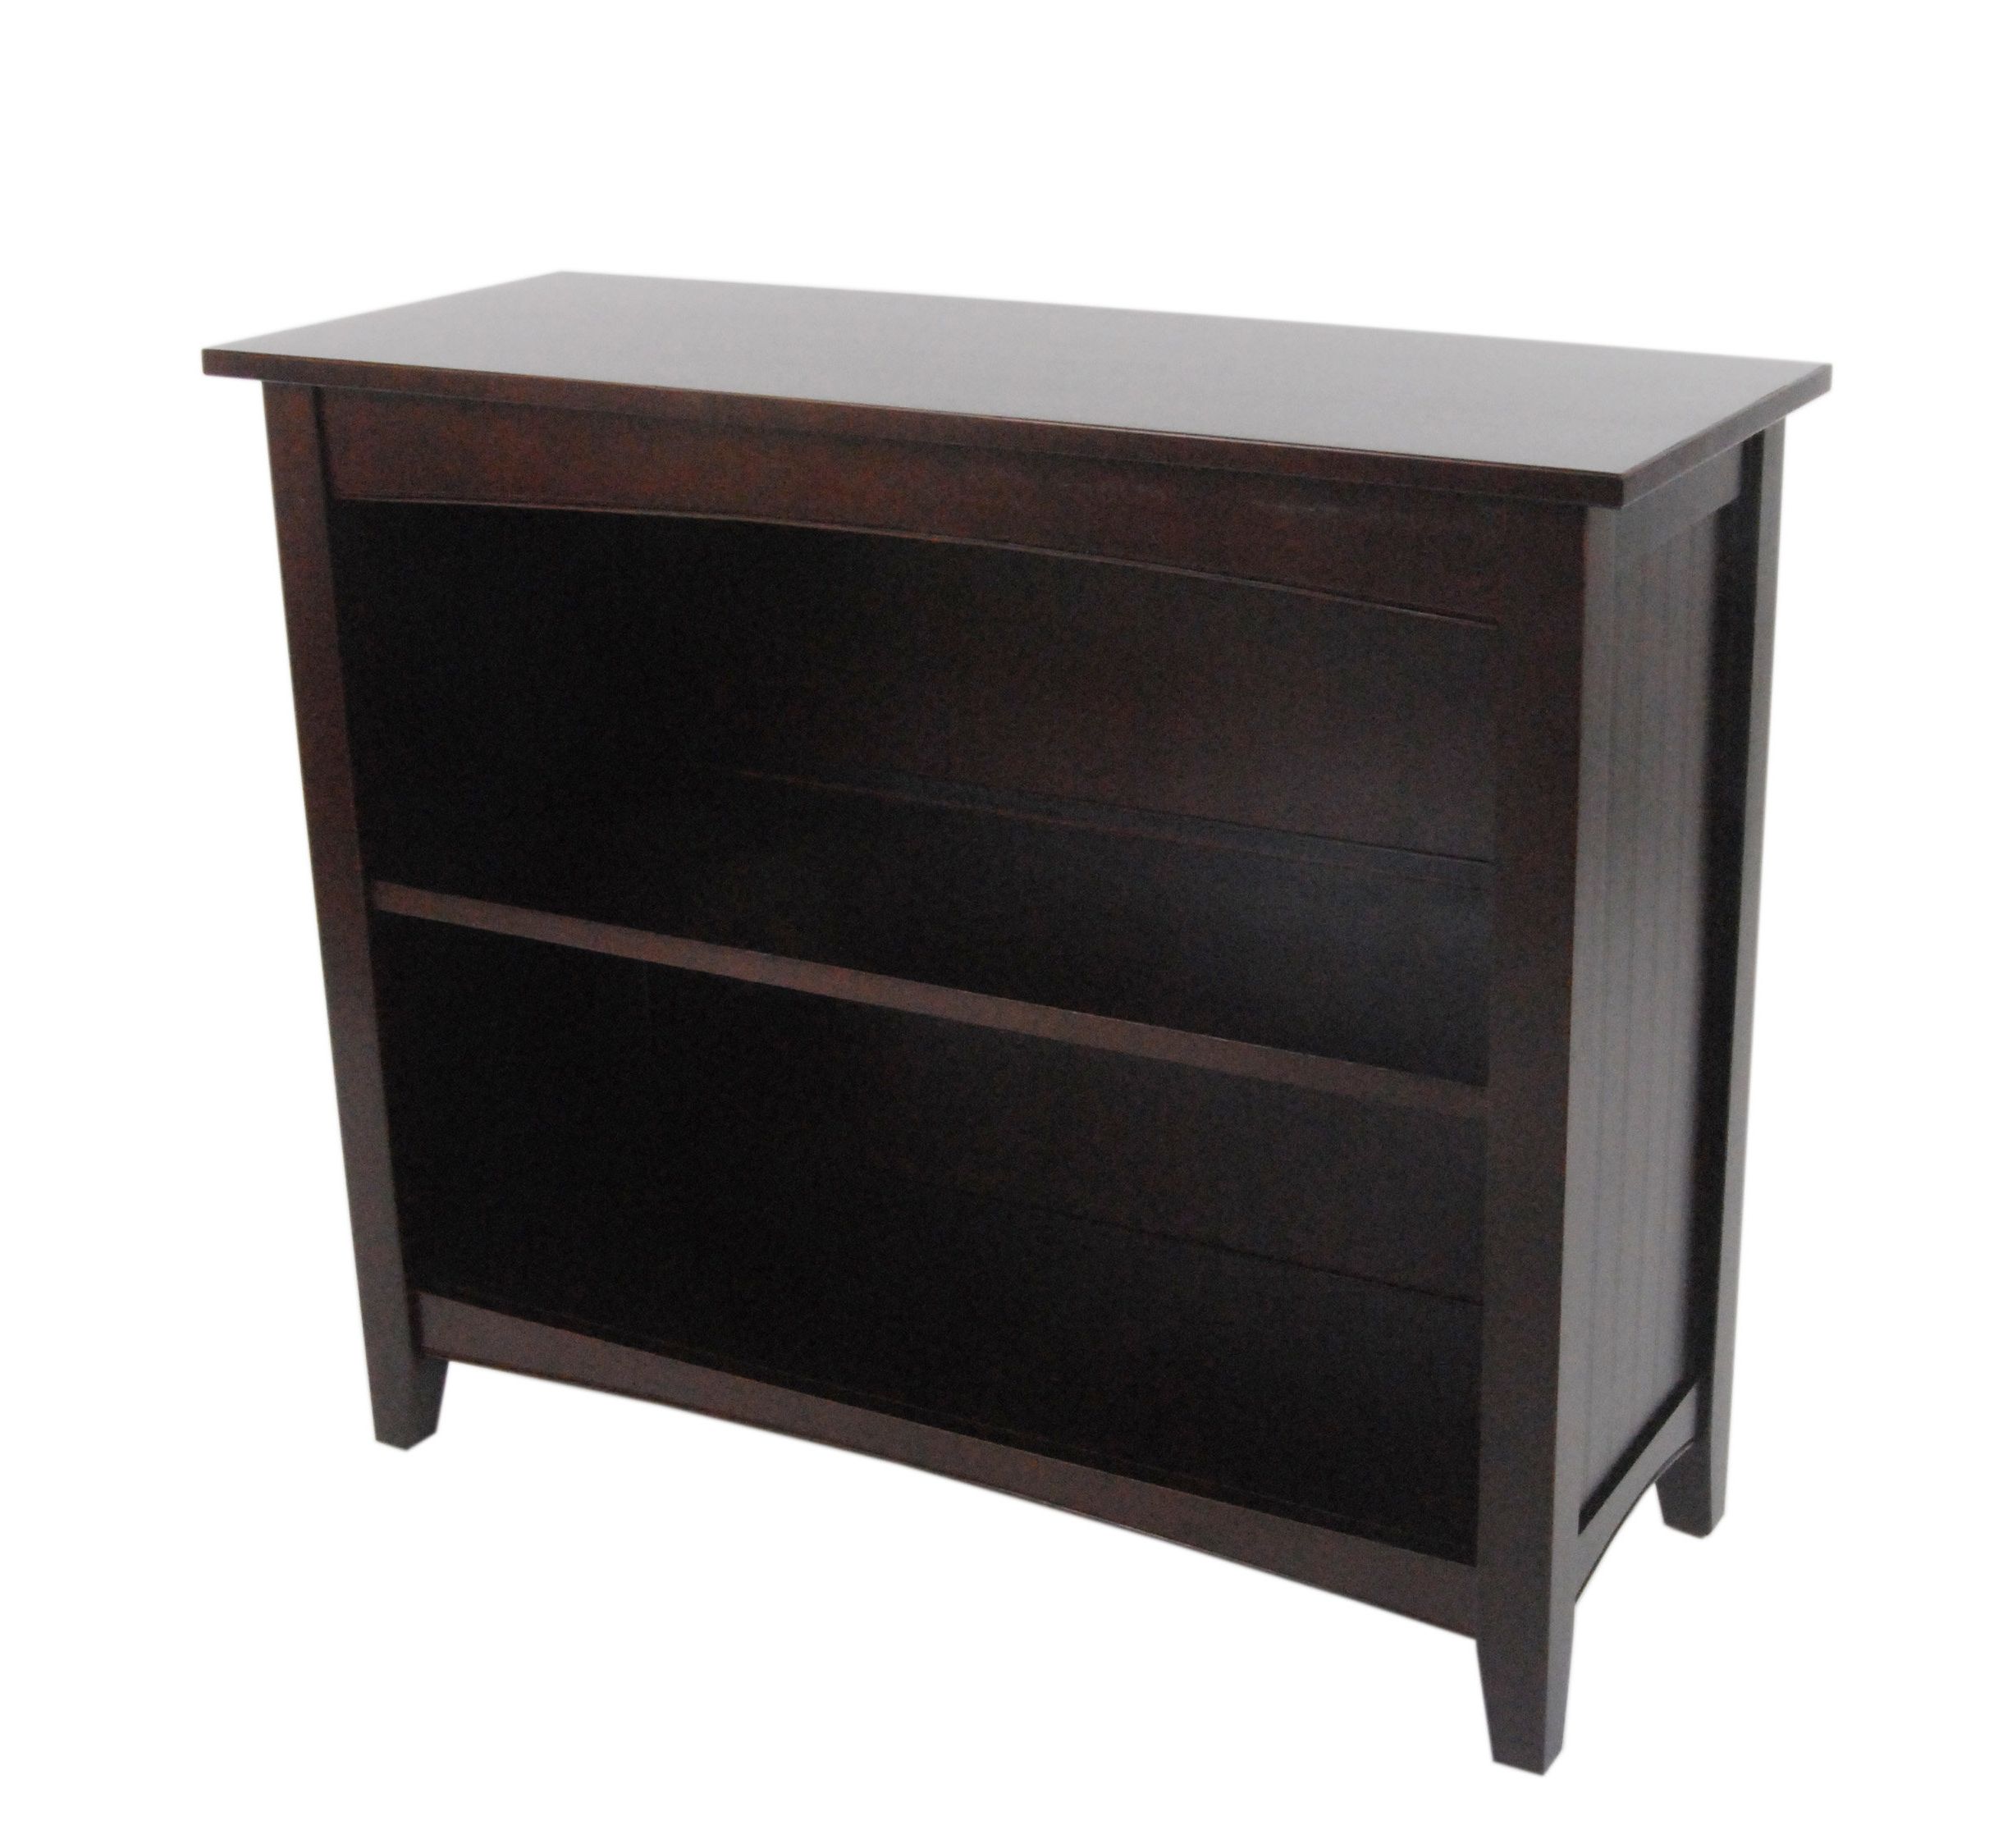 Most Recently Released Three Posts Kerlin Standard Bookcase Throughout Kerlin Standard Bookcases (View 6 of 20)